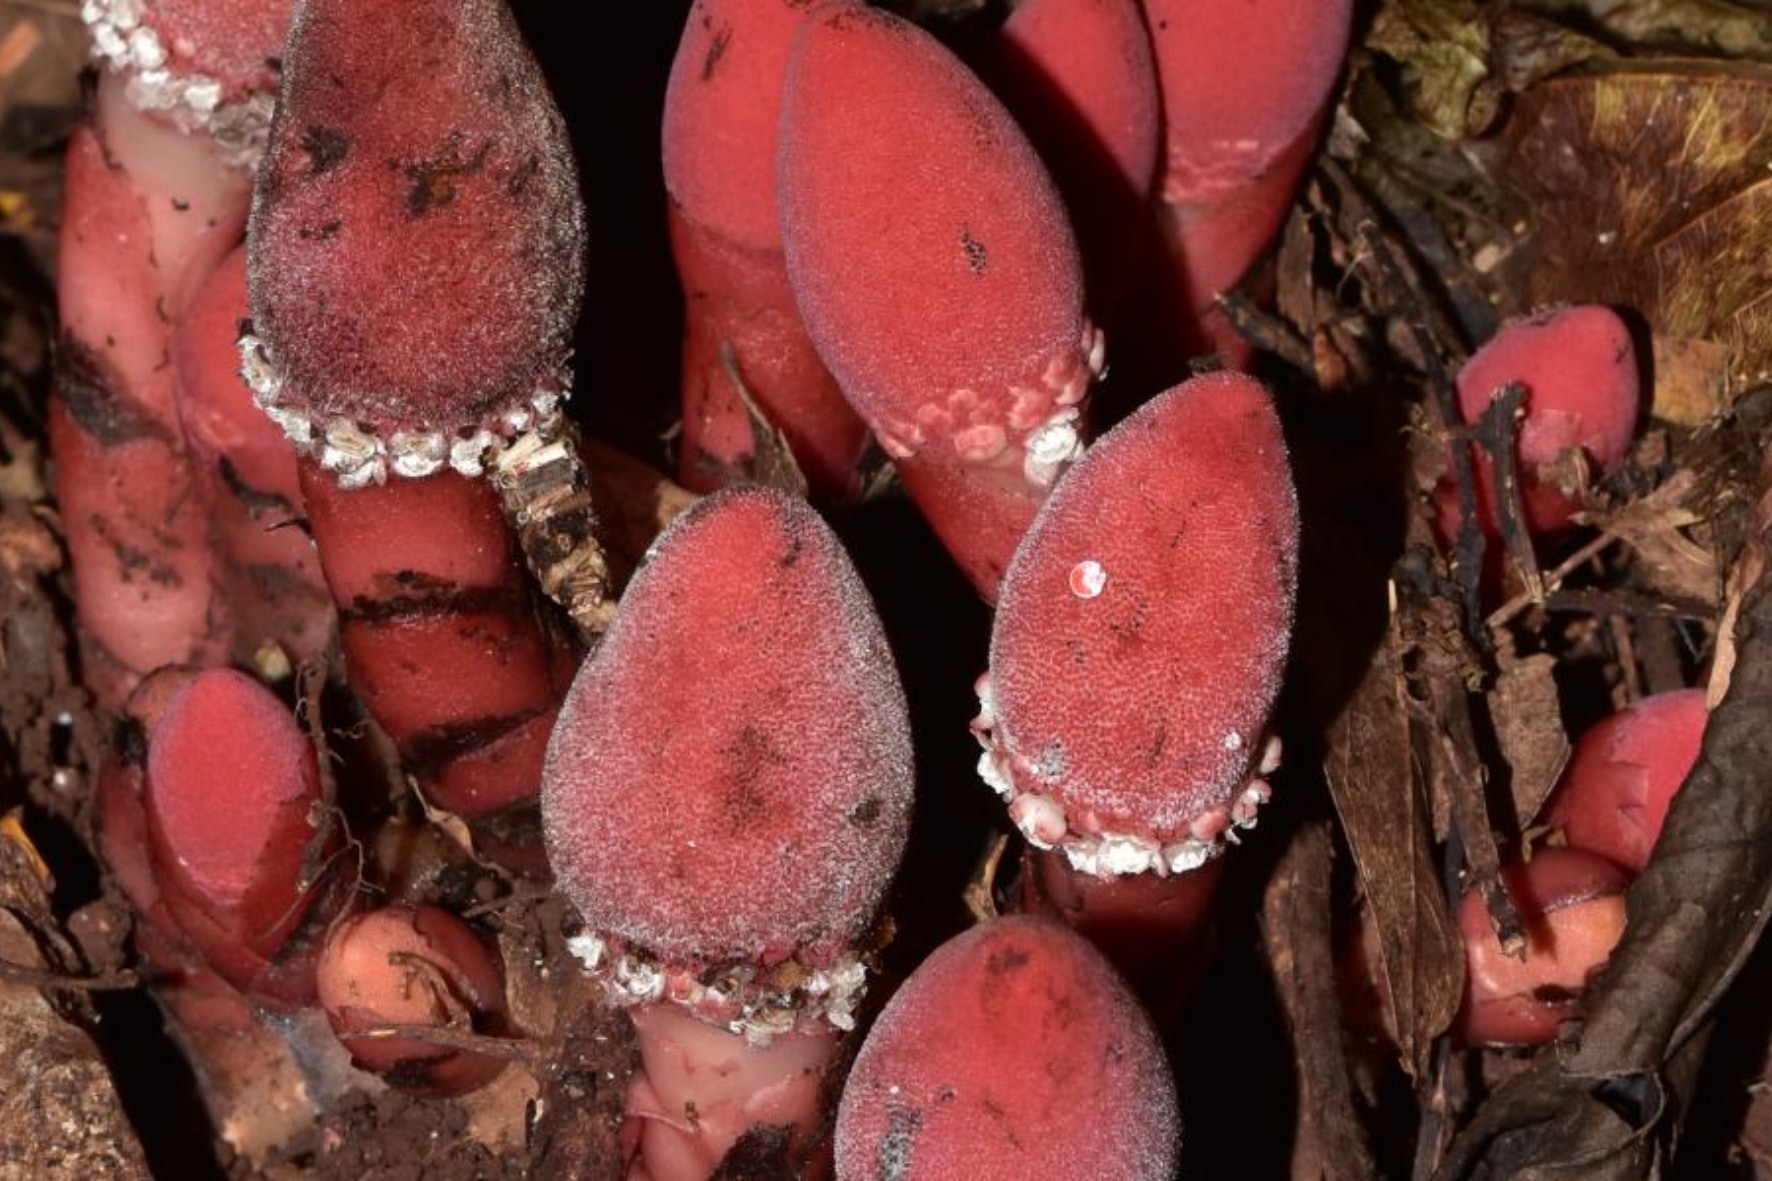 Balanophora, an amazing parasitic plant that turns host cells into its own body – Rhinology